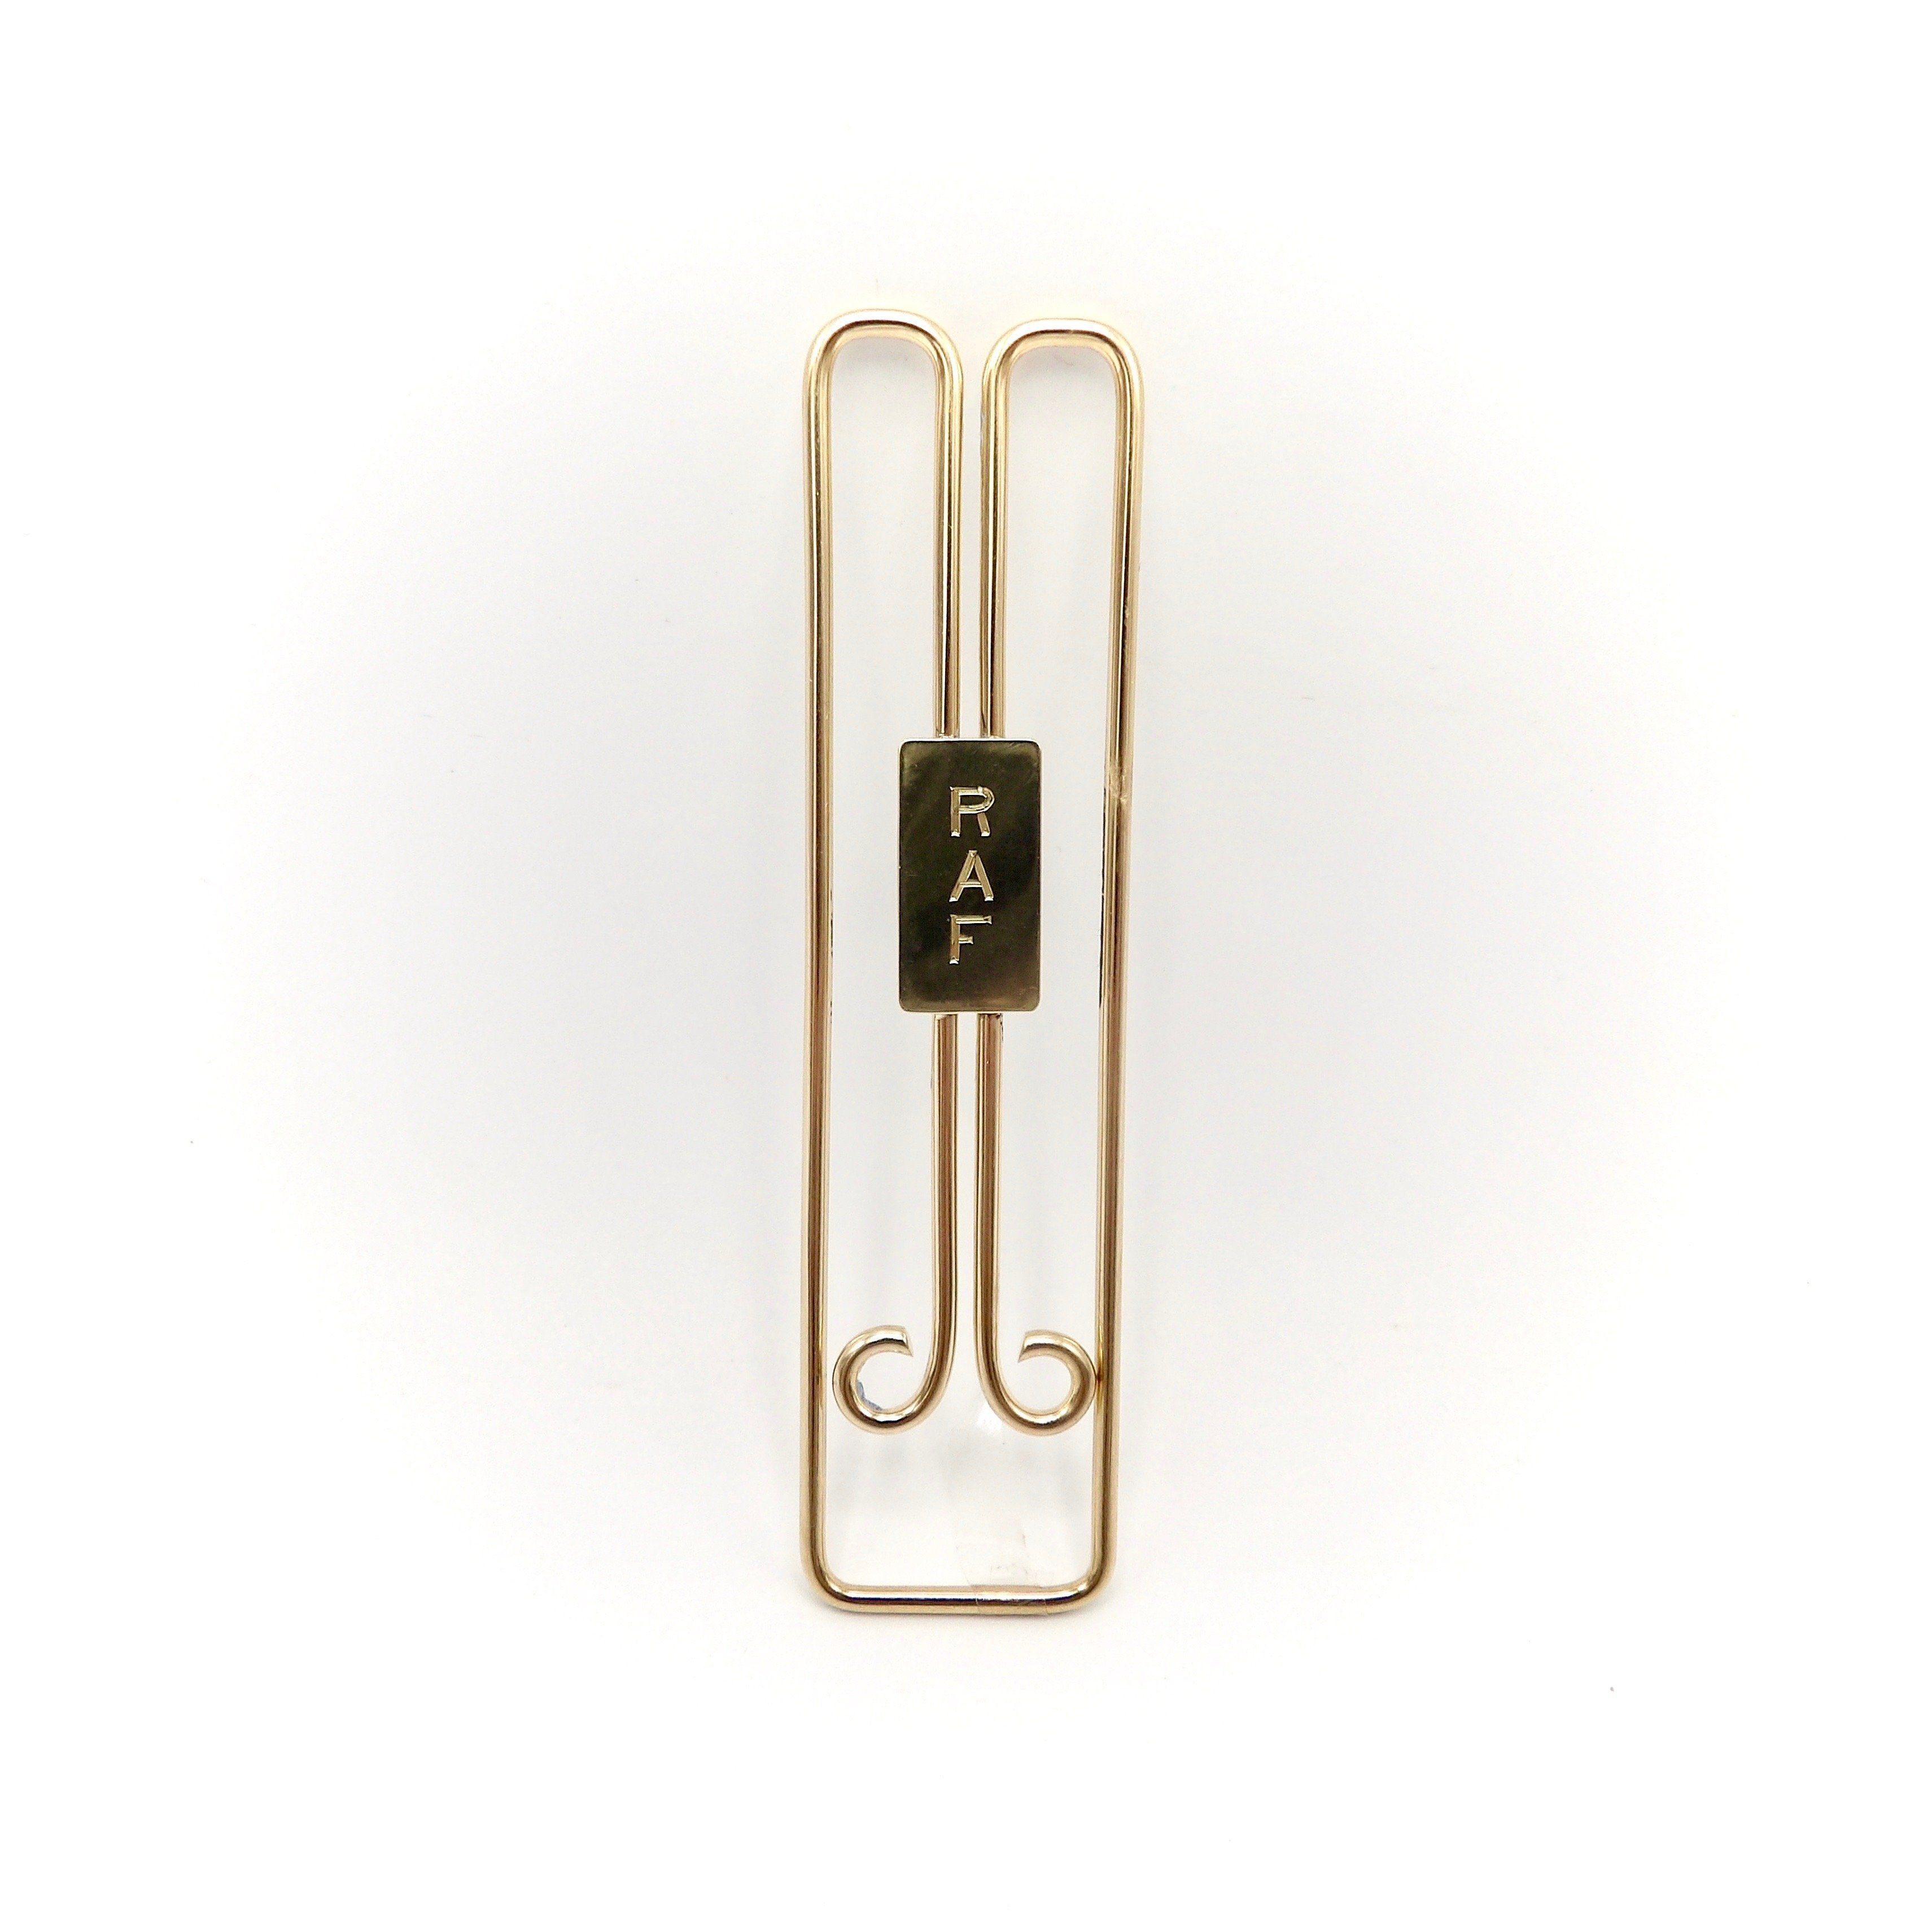 This is an elegantly designed 14 karat gold Cartier money clip.  It has a classic retro streamline design.  Made out of round heavy gold wire that is 1.8mm thick, it has been masterfully bent into this clip shape. The curling in of the end wires is